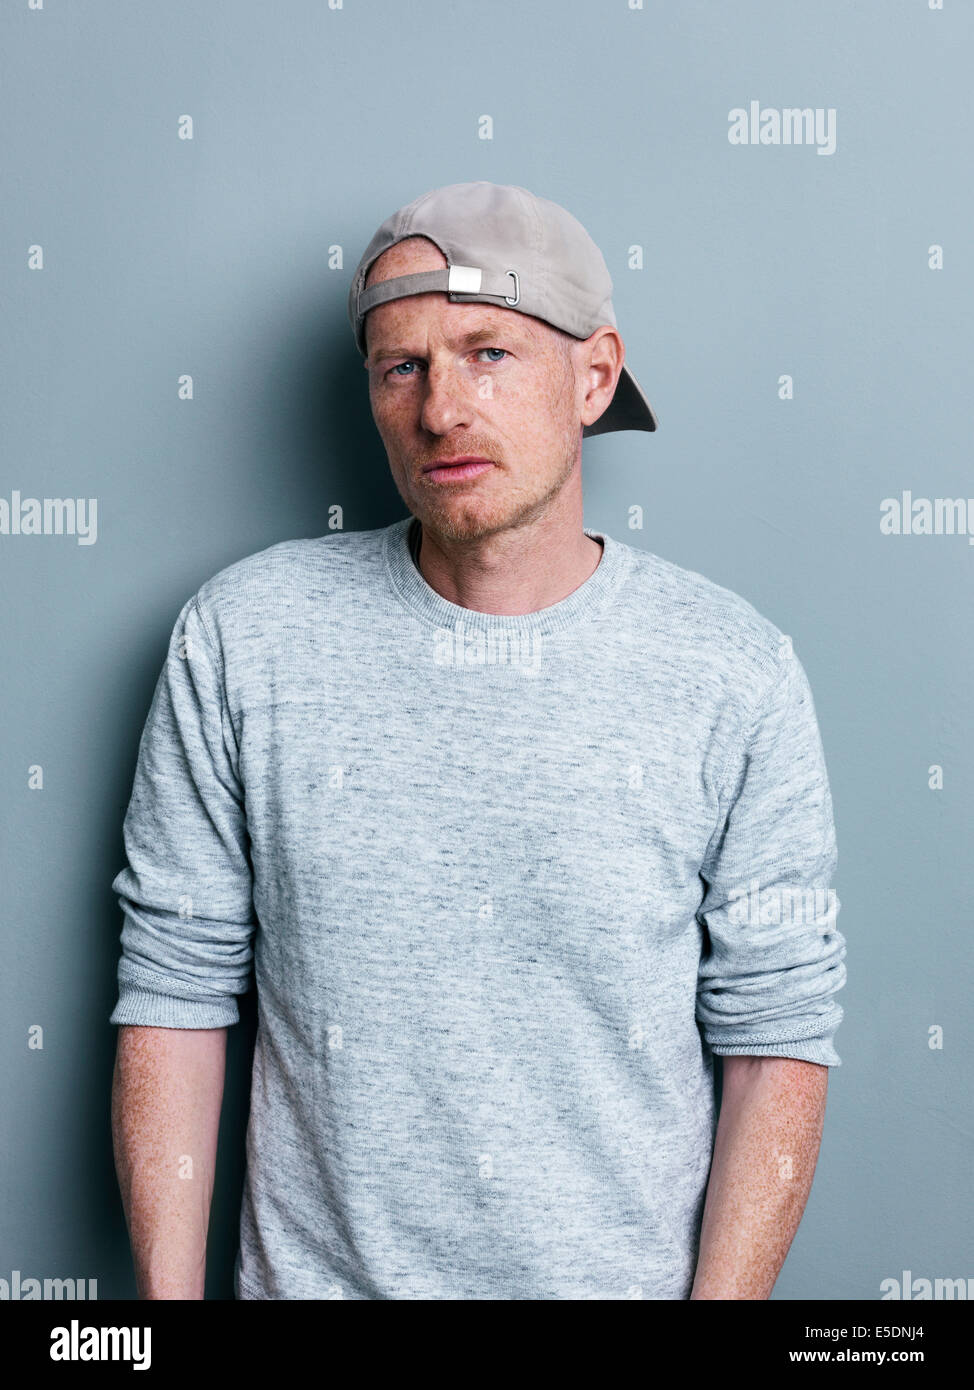 Portrait of man with basecap in front of gray background Stock Photo